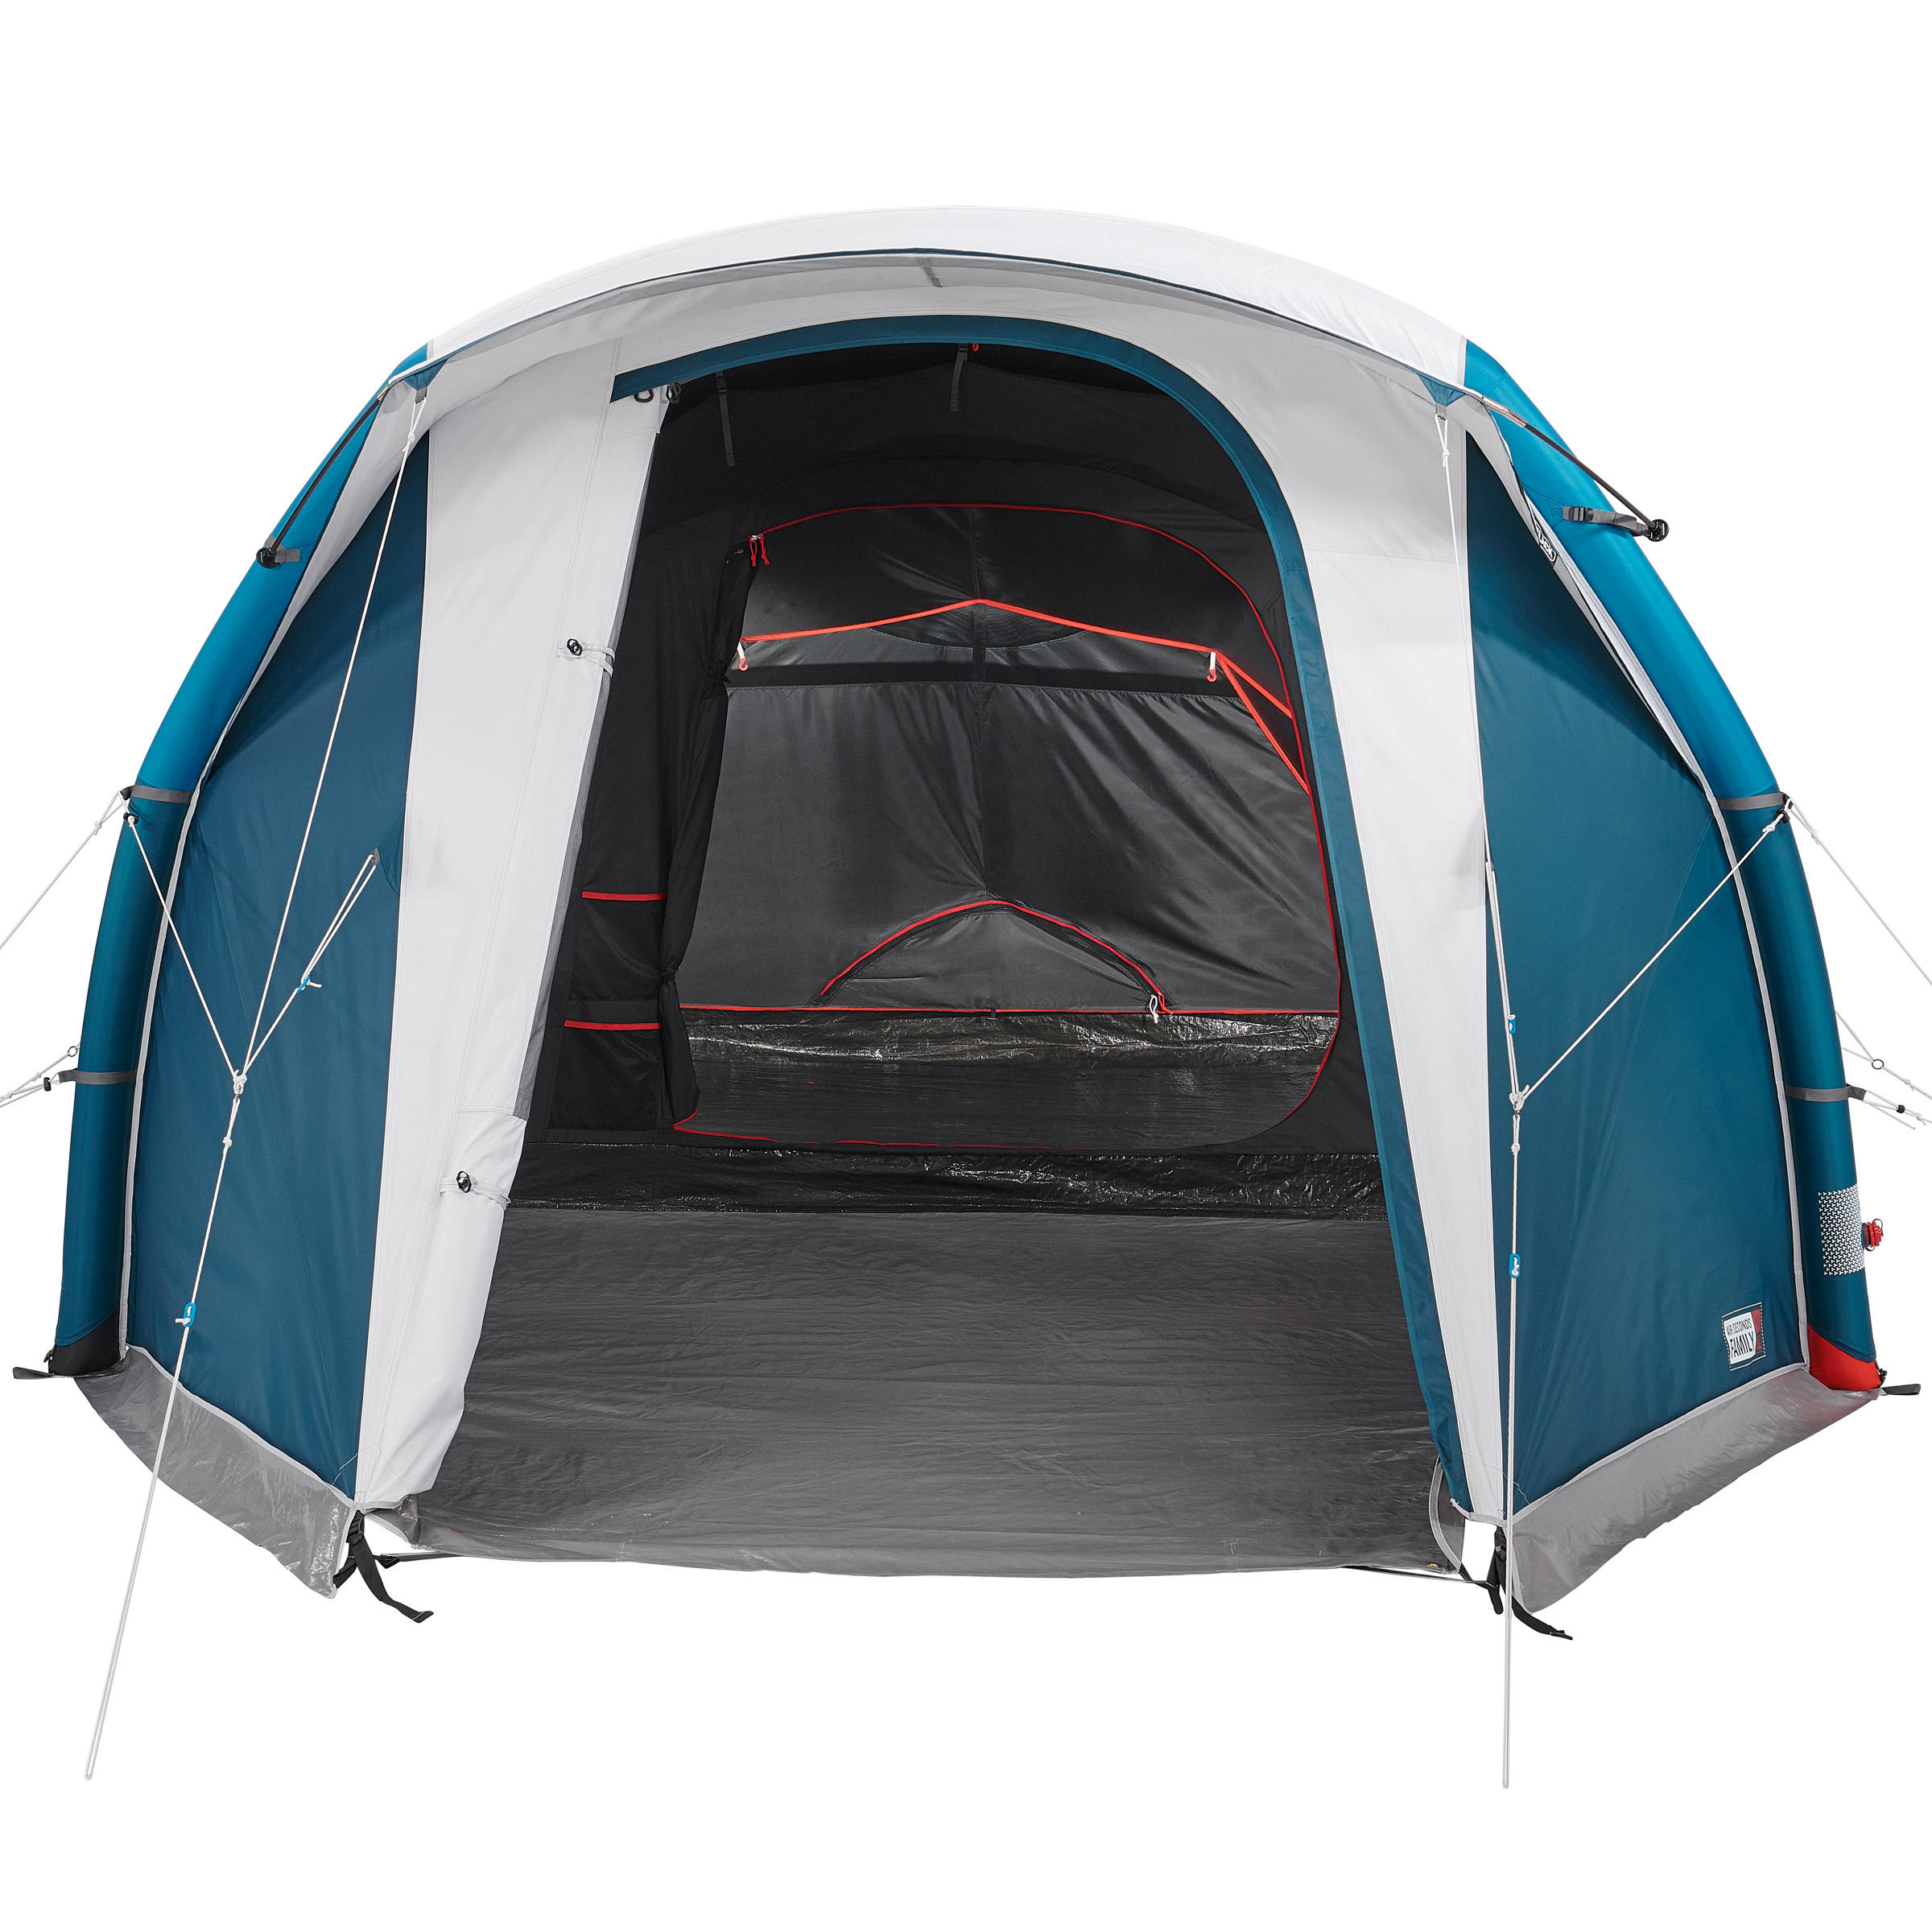 CN Inflatable Camping Tent AIR SECONDS 